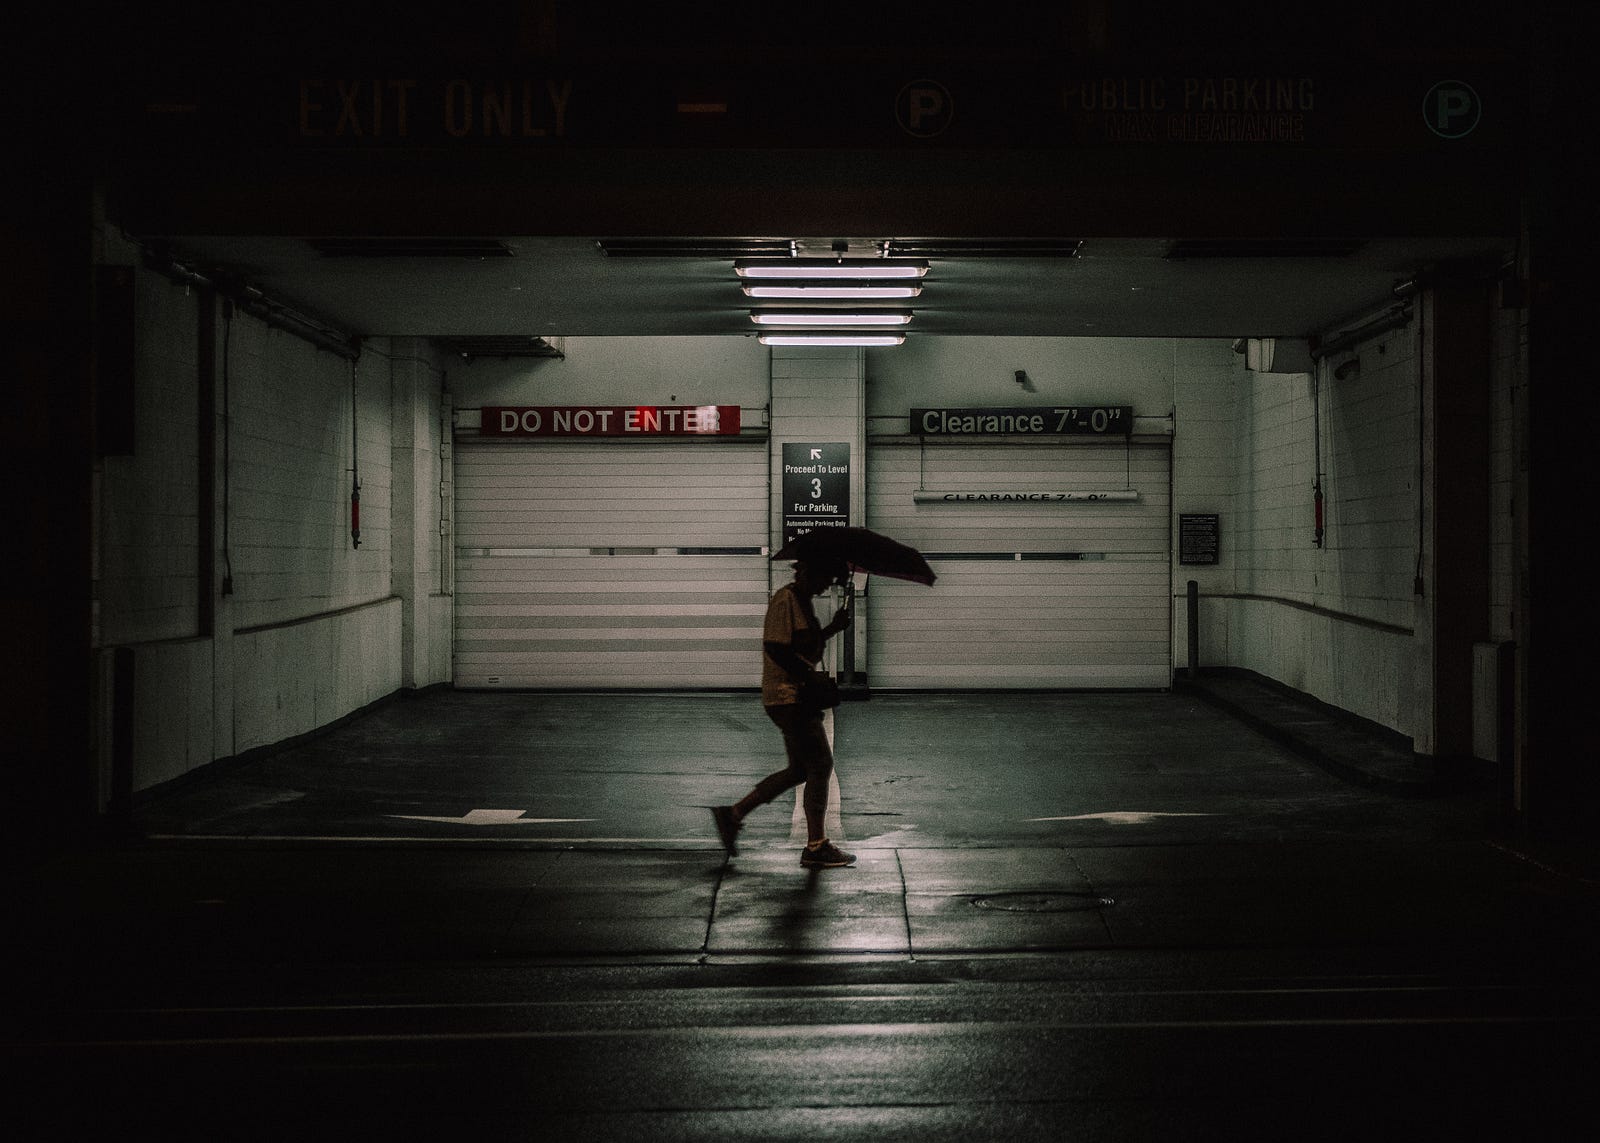 A person walks with an umbrella in a fairly dark area. Anxiety disorders can manifest in various forms, such as generalized anxiety disorder (GAD), panic disorder, social anxiety disorder, specific phobias, and post-traumatic stress disorder (PTSD).